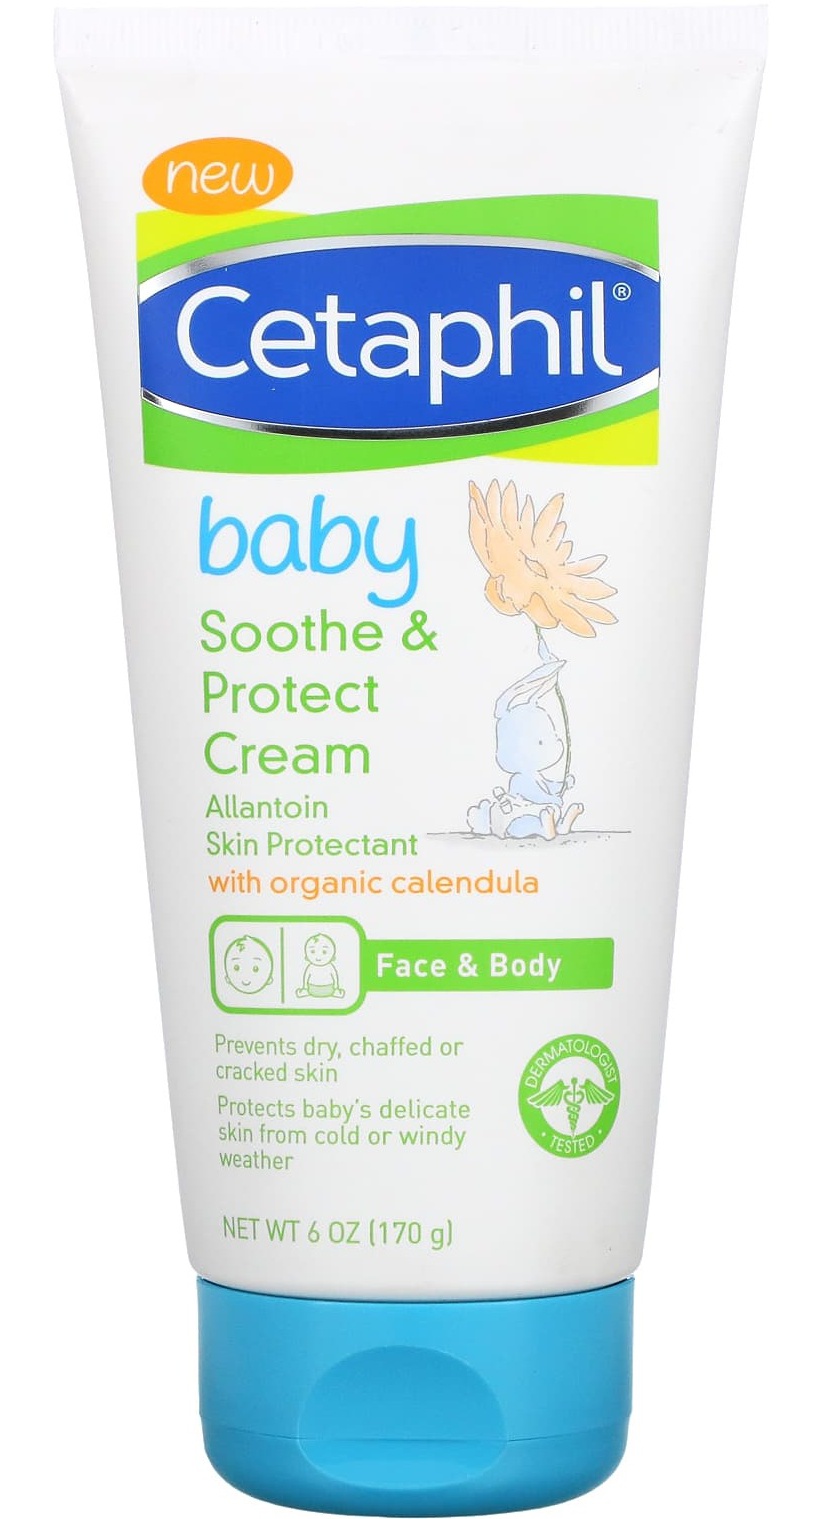 Cetaphil Baby, Soothe & Protect Cream Allantoin Skin Protectant With Organic Calendula